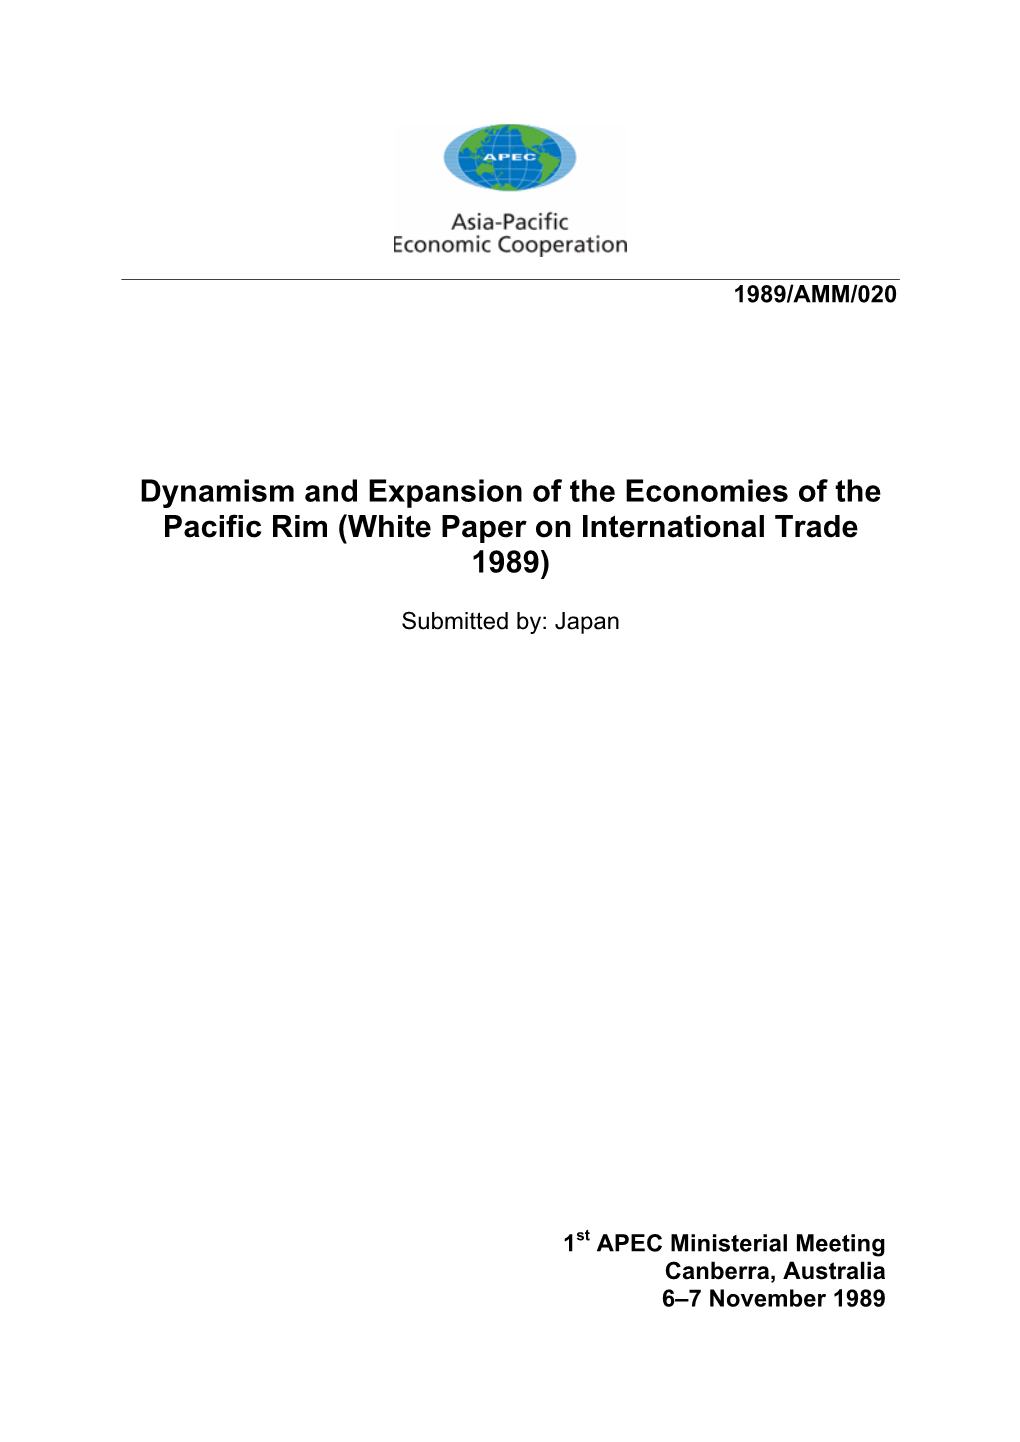 Dynamism and Expansion of the Economies of the Pacific Rim (White Paper on International Trade 1989)